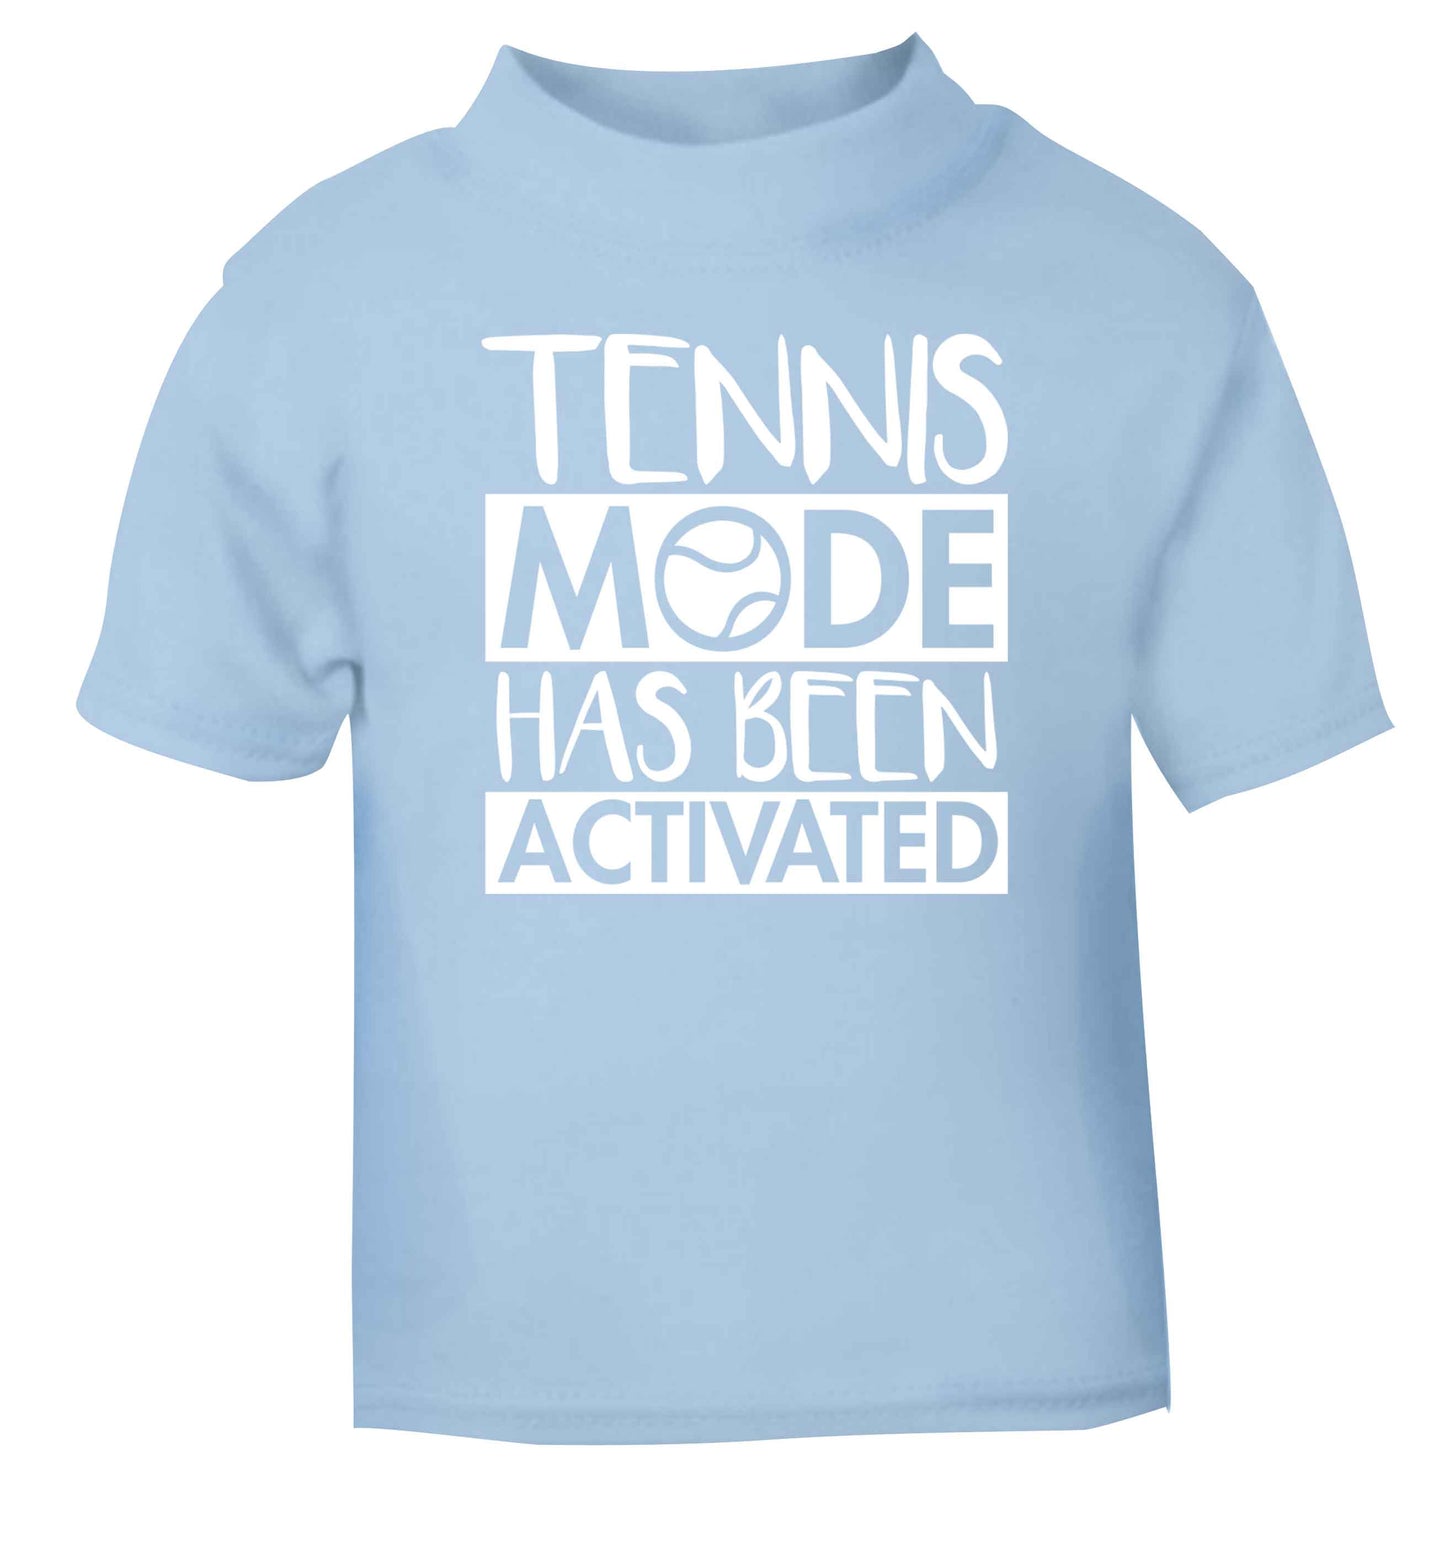 Tennis mode has been activated light blue Baby Toddler Tshirt 2 Years